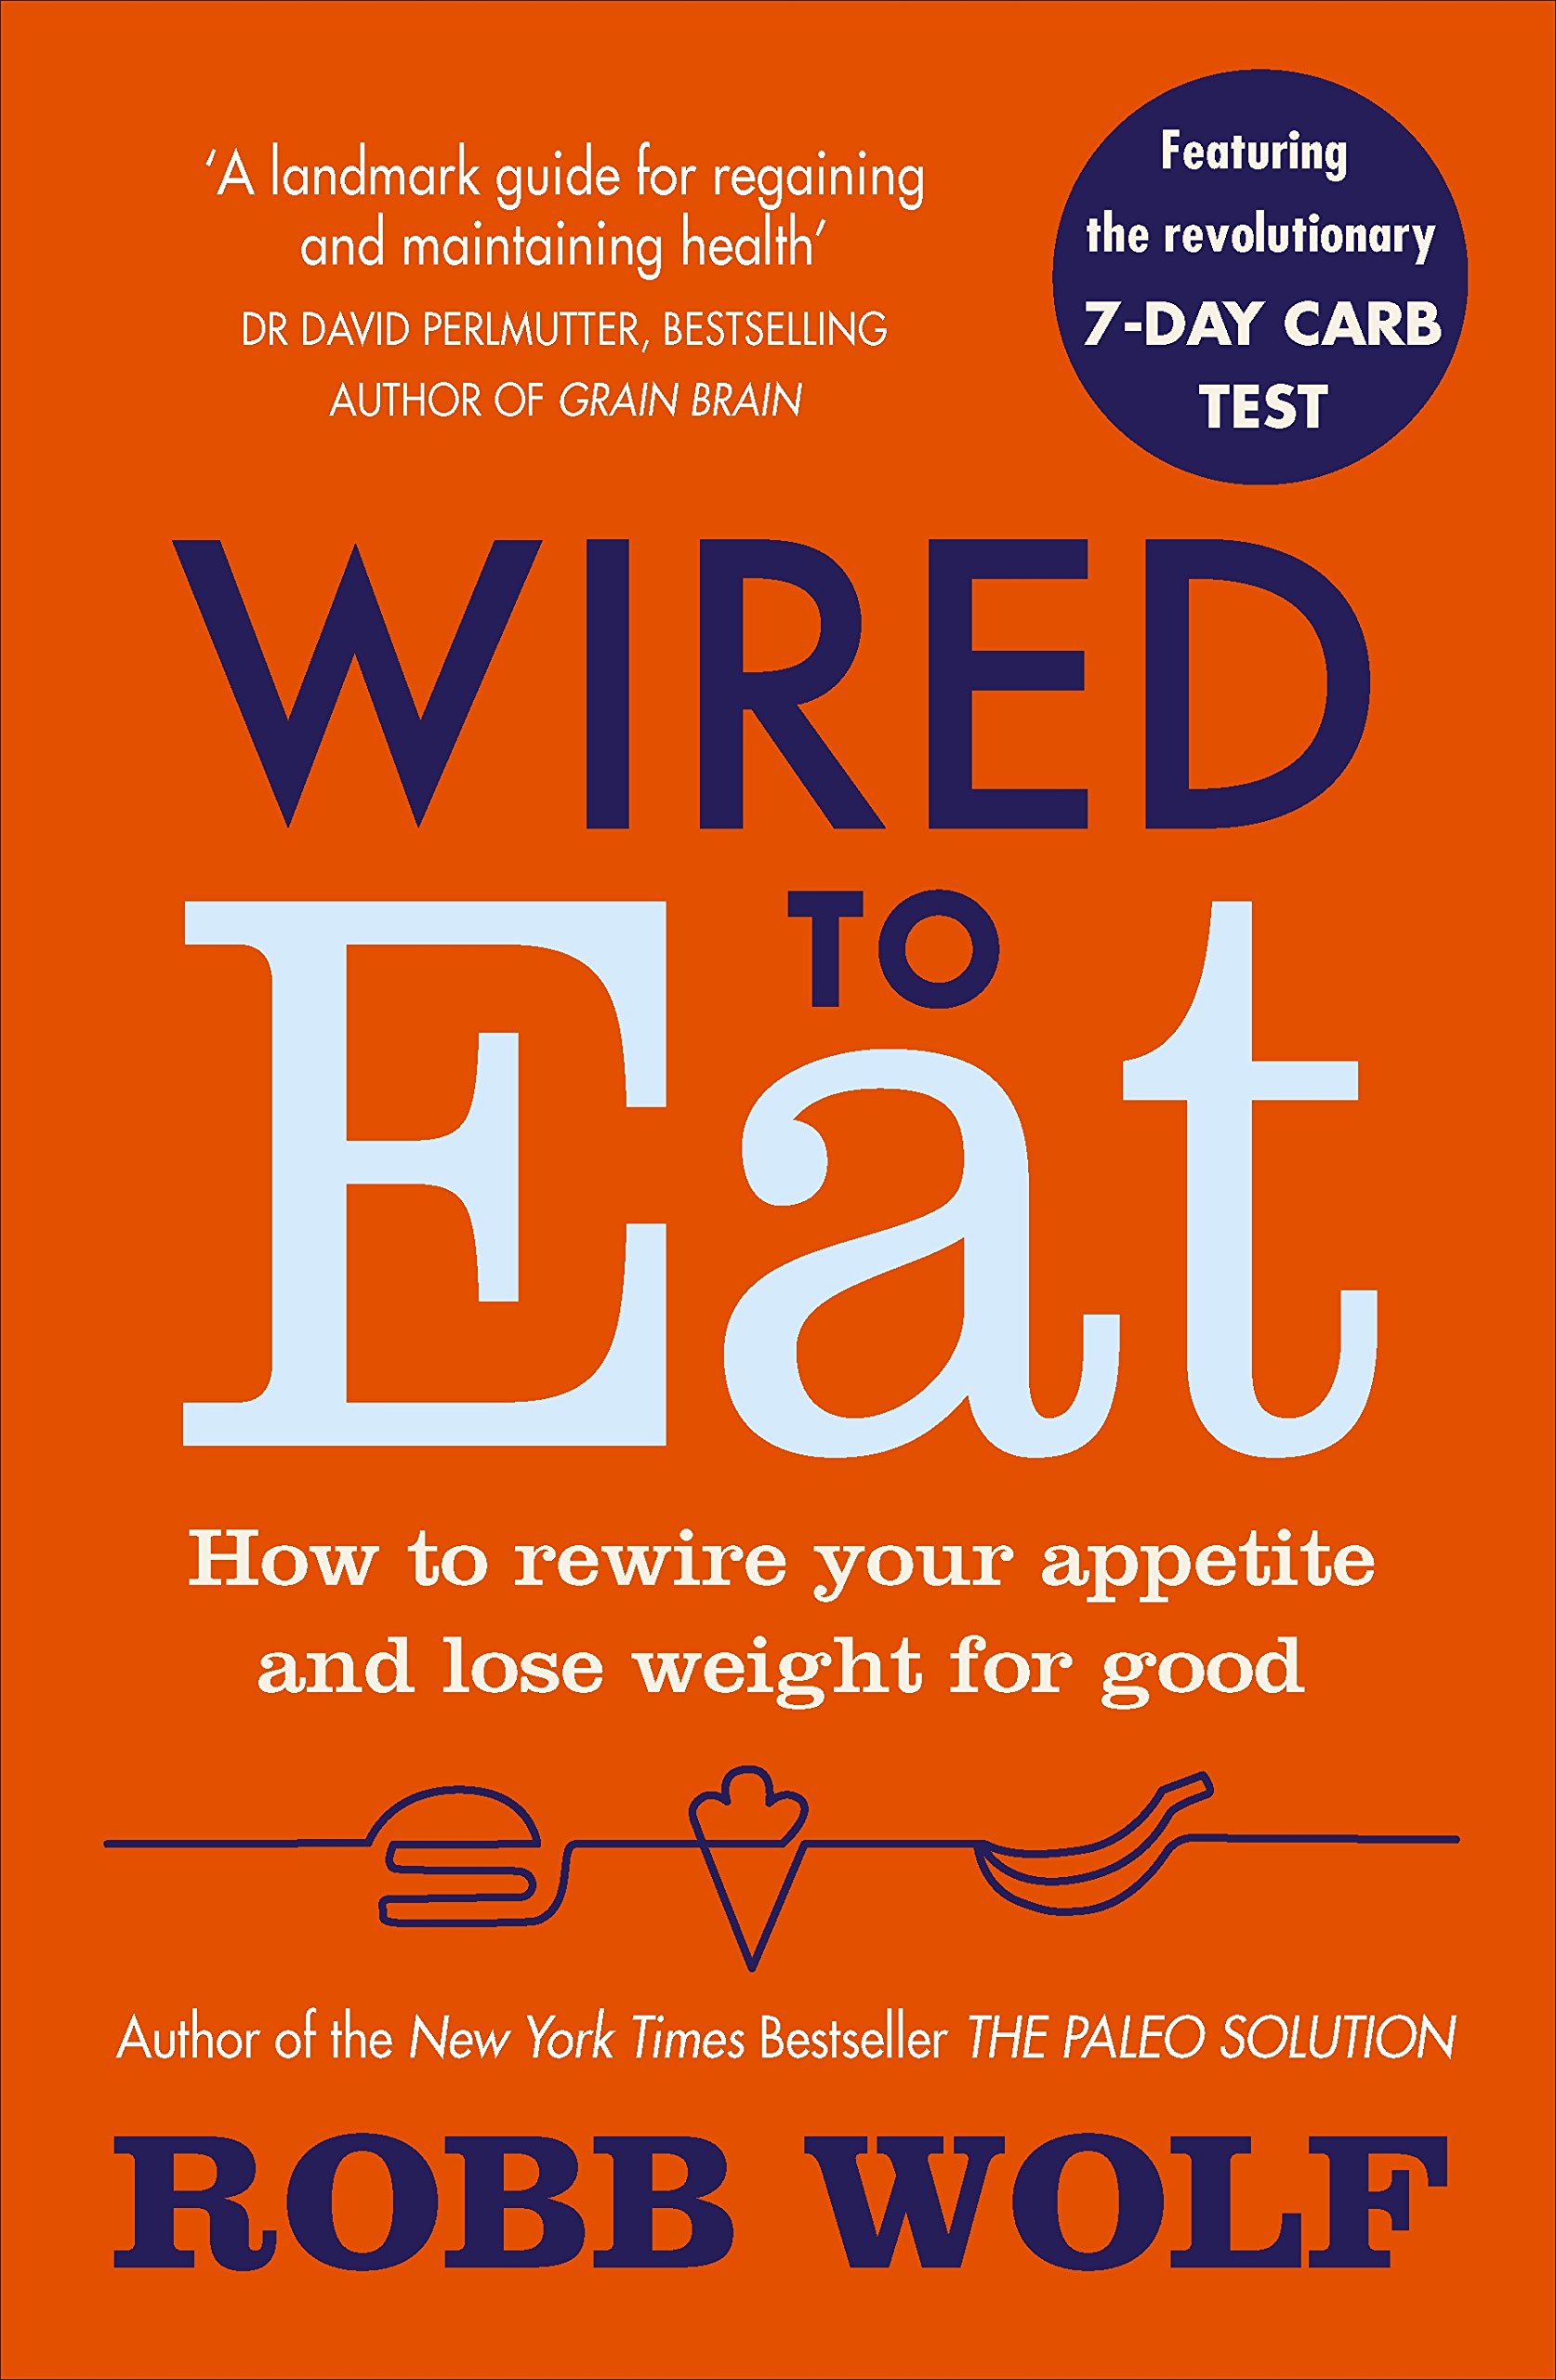 Wired to Eat - Robb Wolf